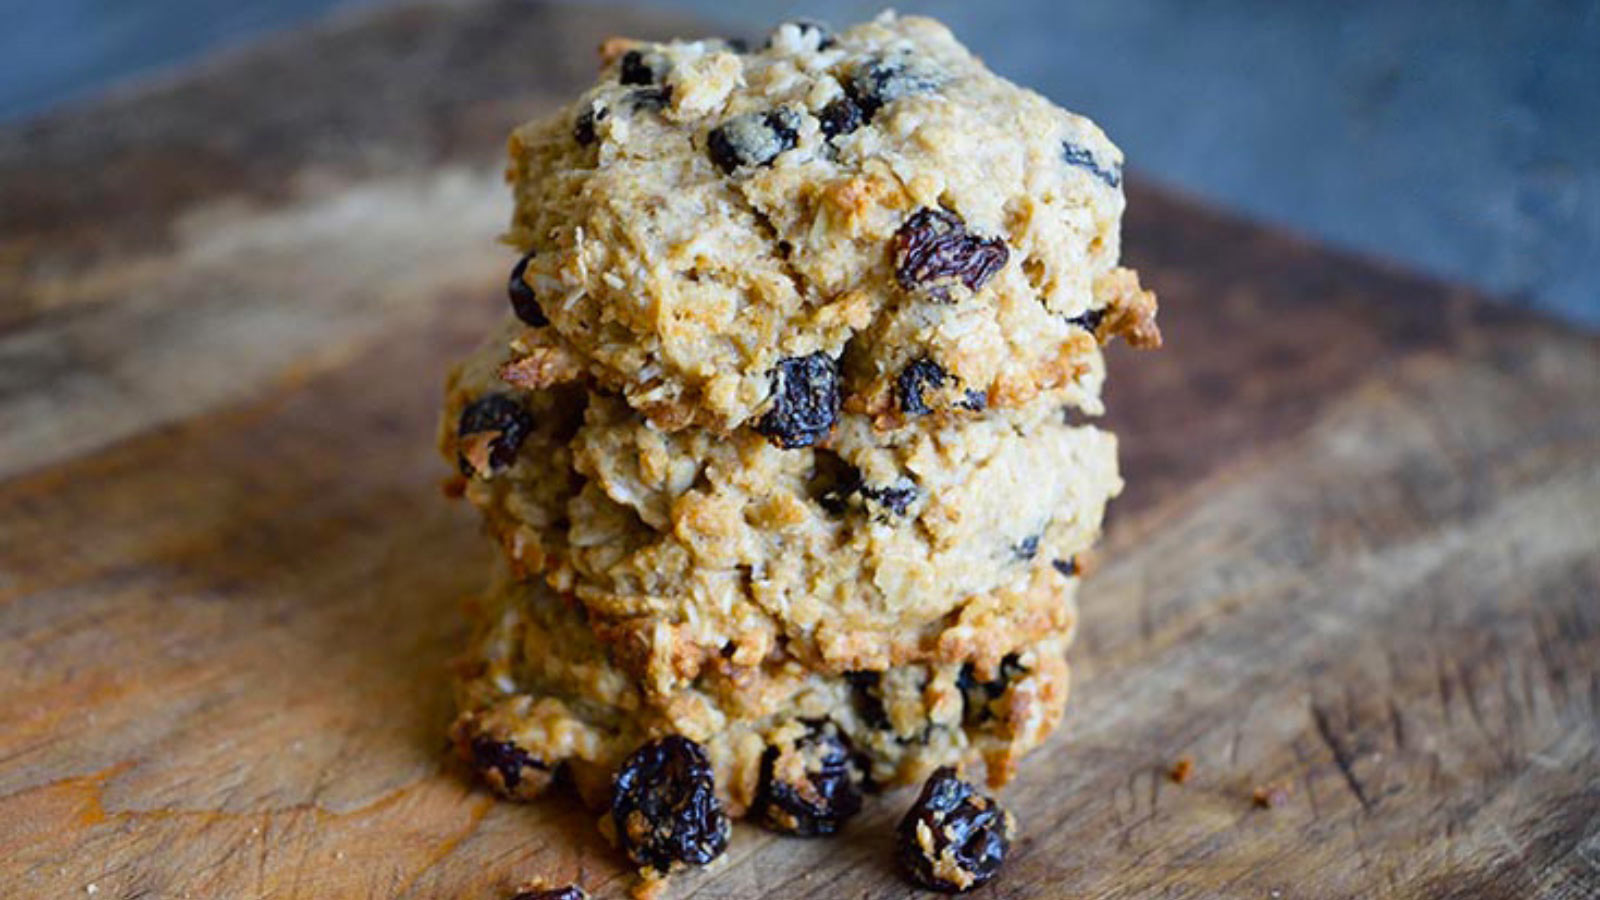 <p>When you are craving a bite of something comforting and a little sweet, these <a href="https://www.thegraciouspantry.com/clean-eating-oatmeal-raisin-cashew-cookies/">oatmeal raisin cookies</a> are sure to do the trick. They travel well with no refrigerators and they are delicious and filling too. </p>